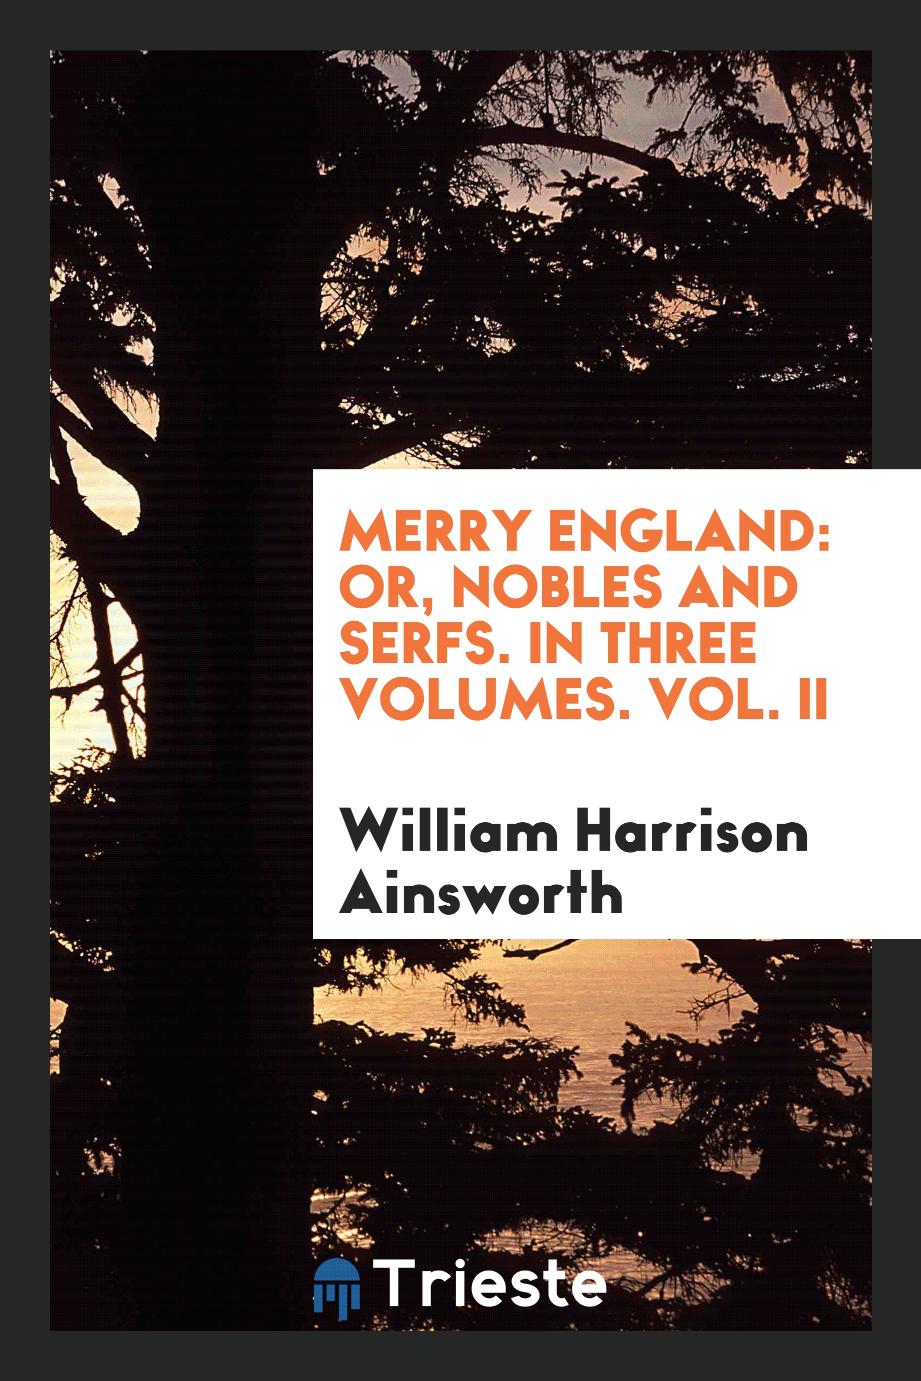 Merry England: Or, Nobles and Serfs. In Three Volumes. Vol. II